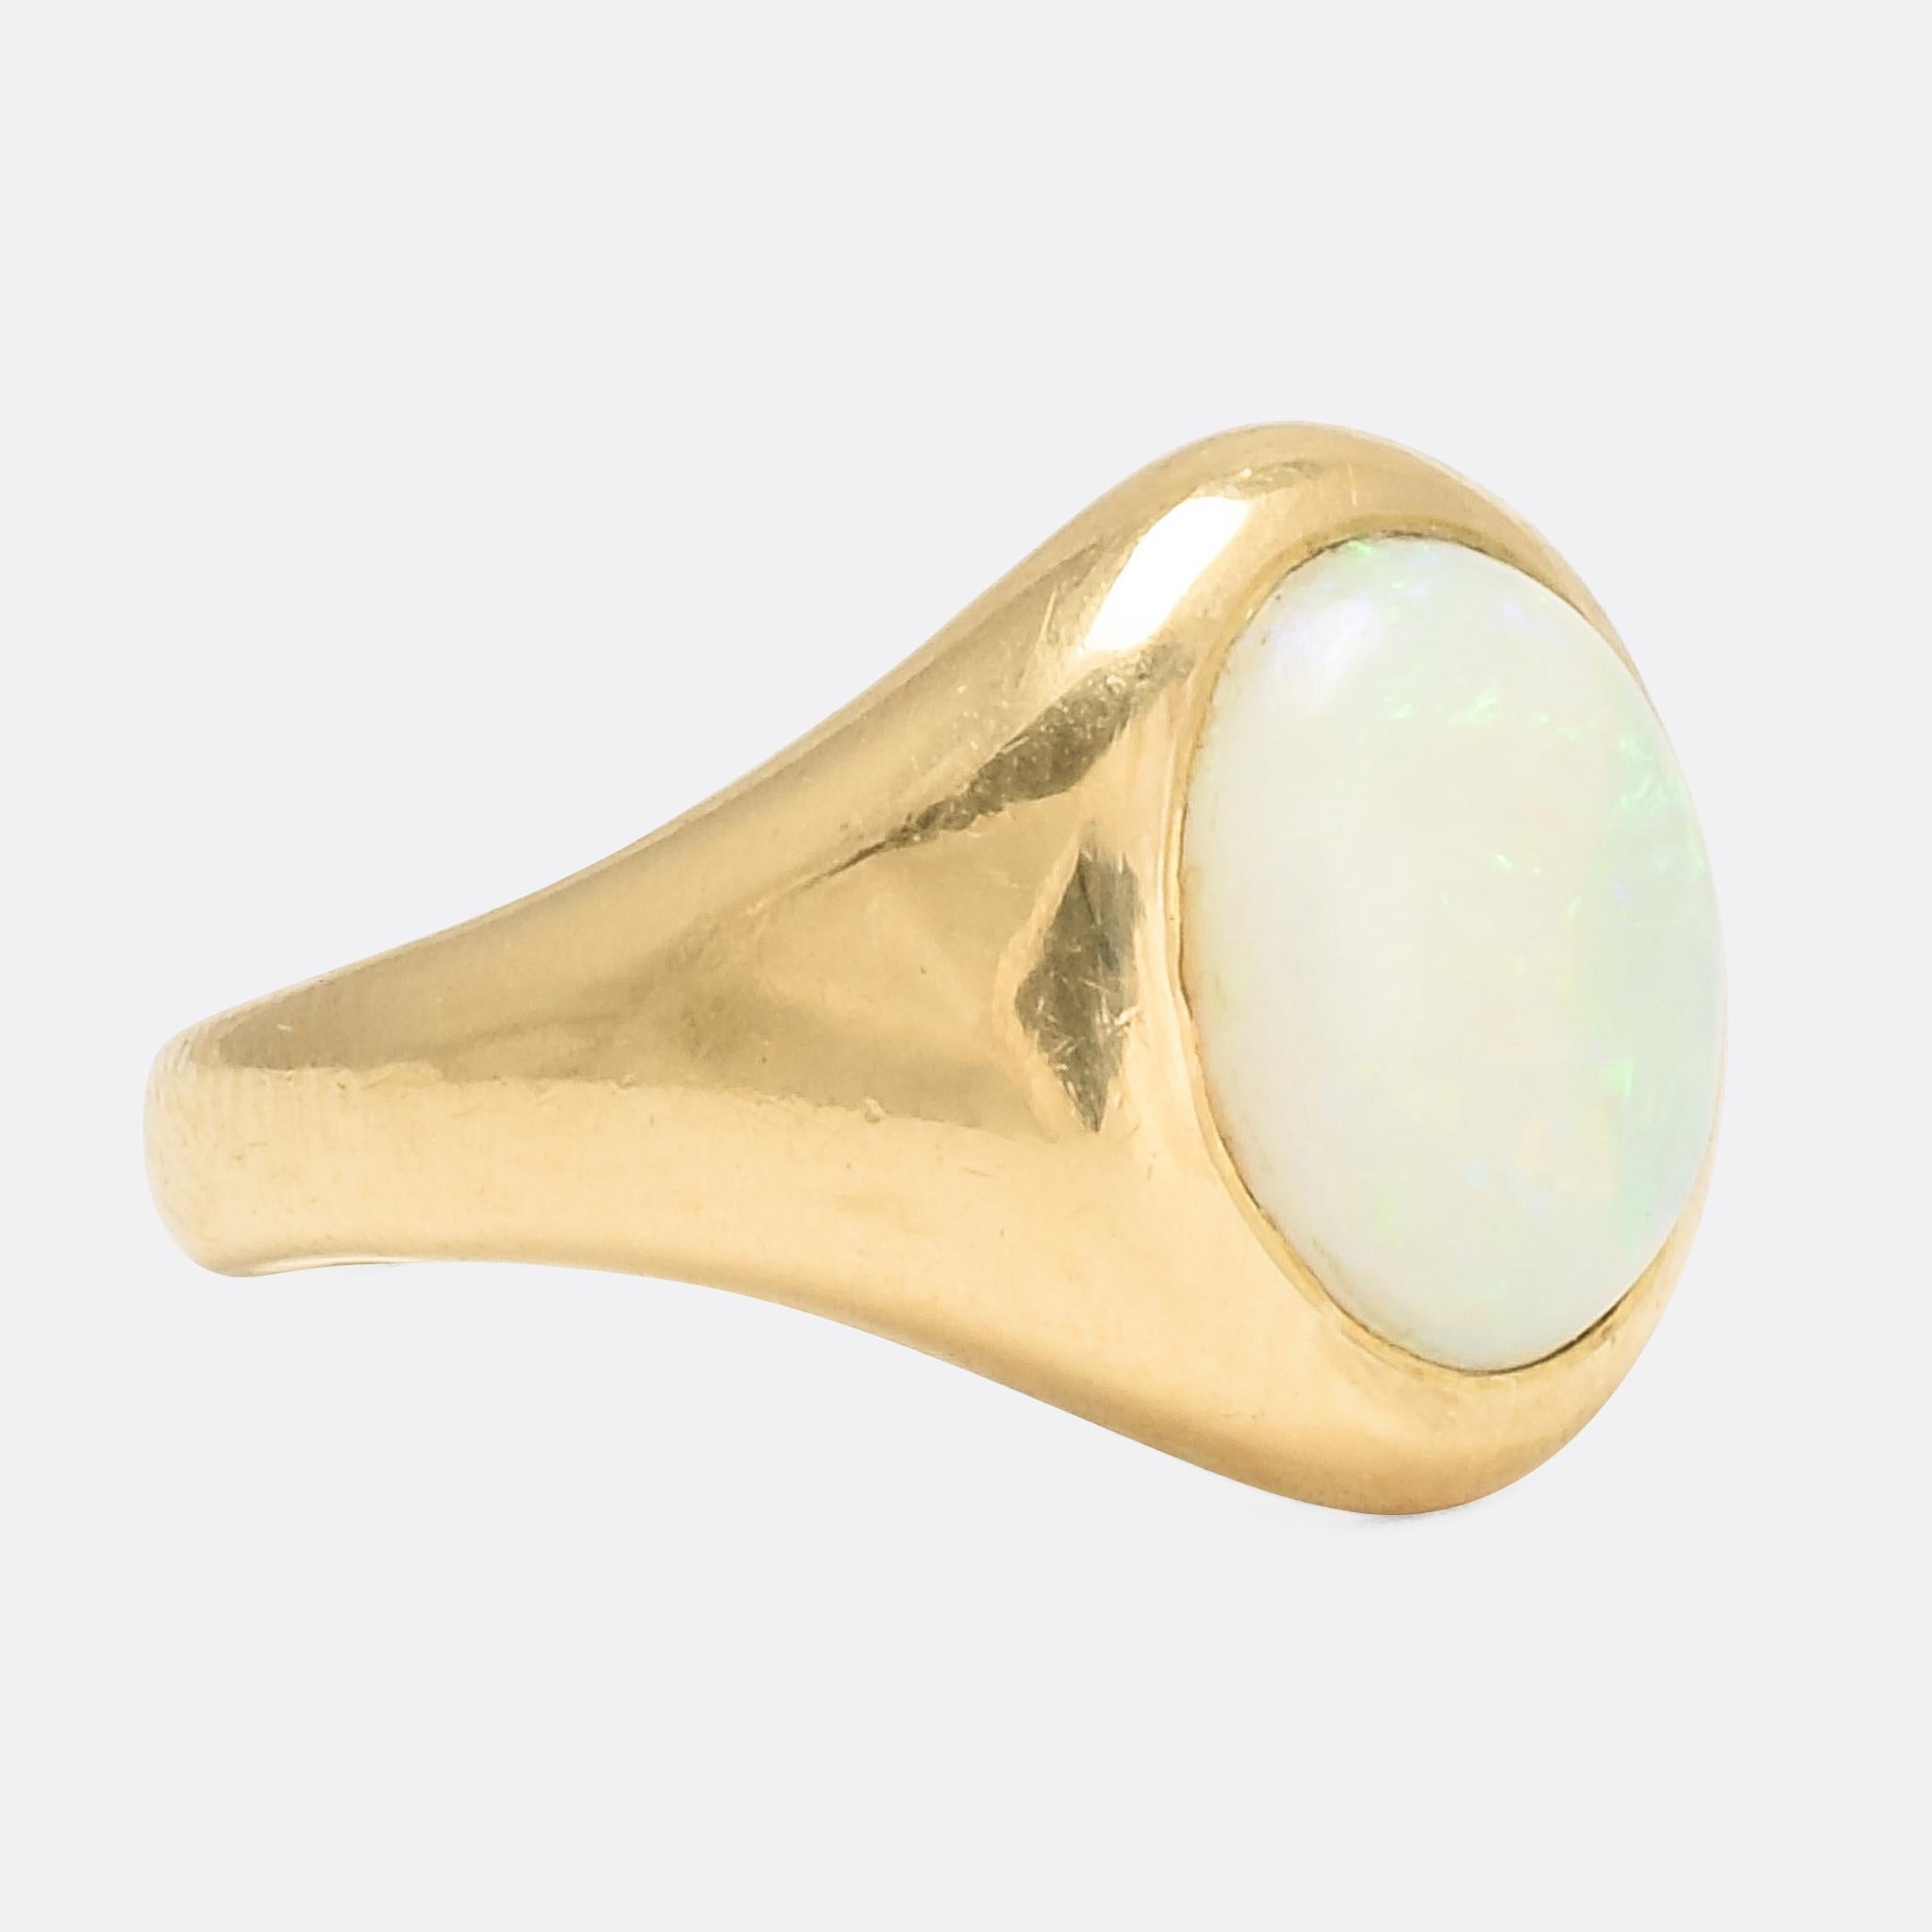 A cool antique signet ring set with a lively opal cabochon. It's crafted in 18 karat yellow gold, with English hallmarks, and dates from the turn of the 20th Century. With a good substantial feel and classic design it's a timeless piece that looks